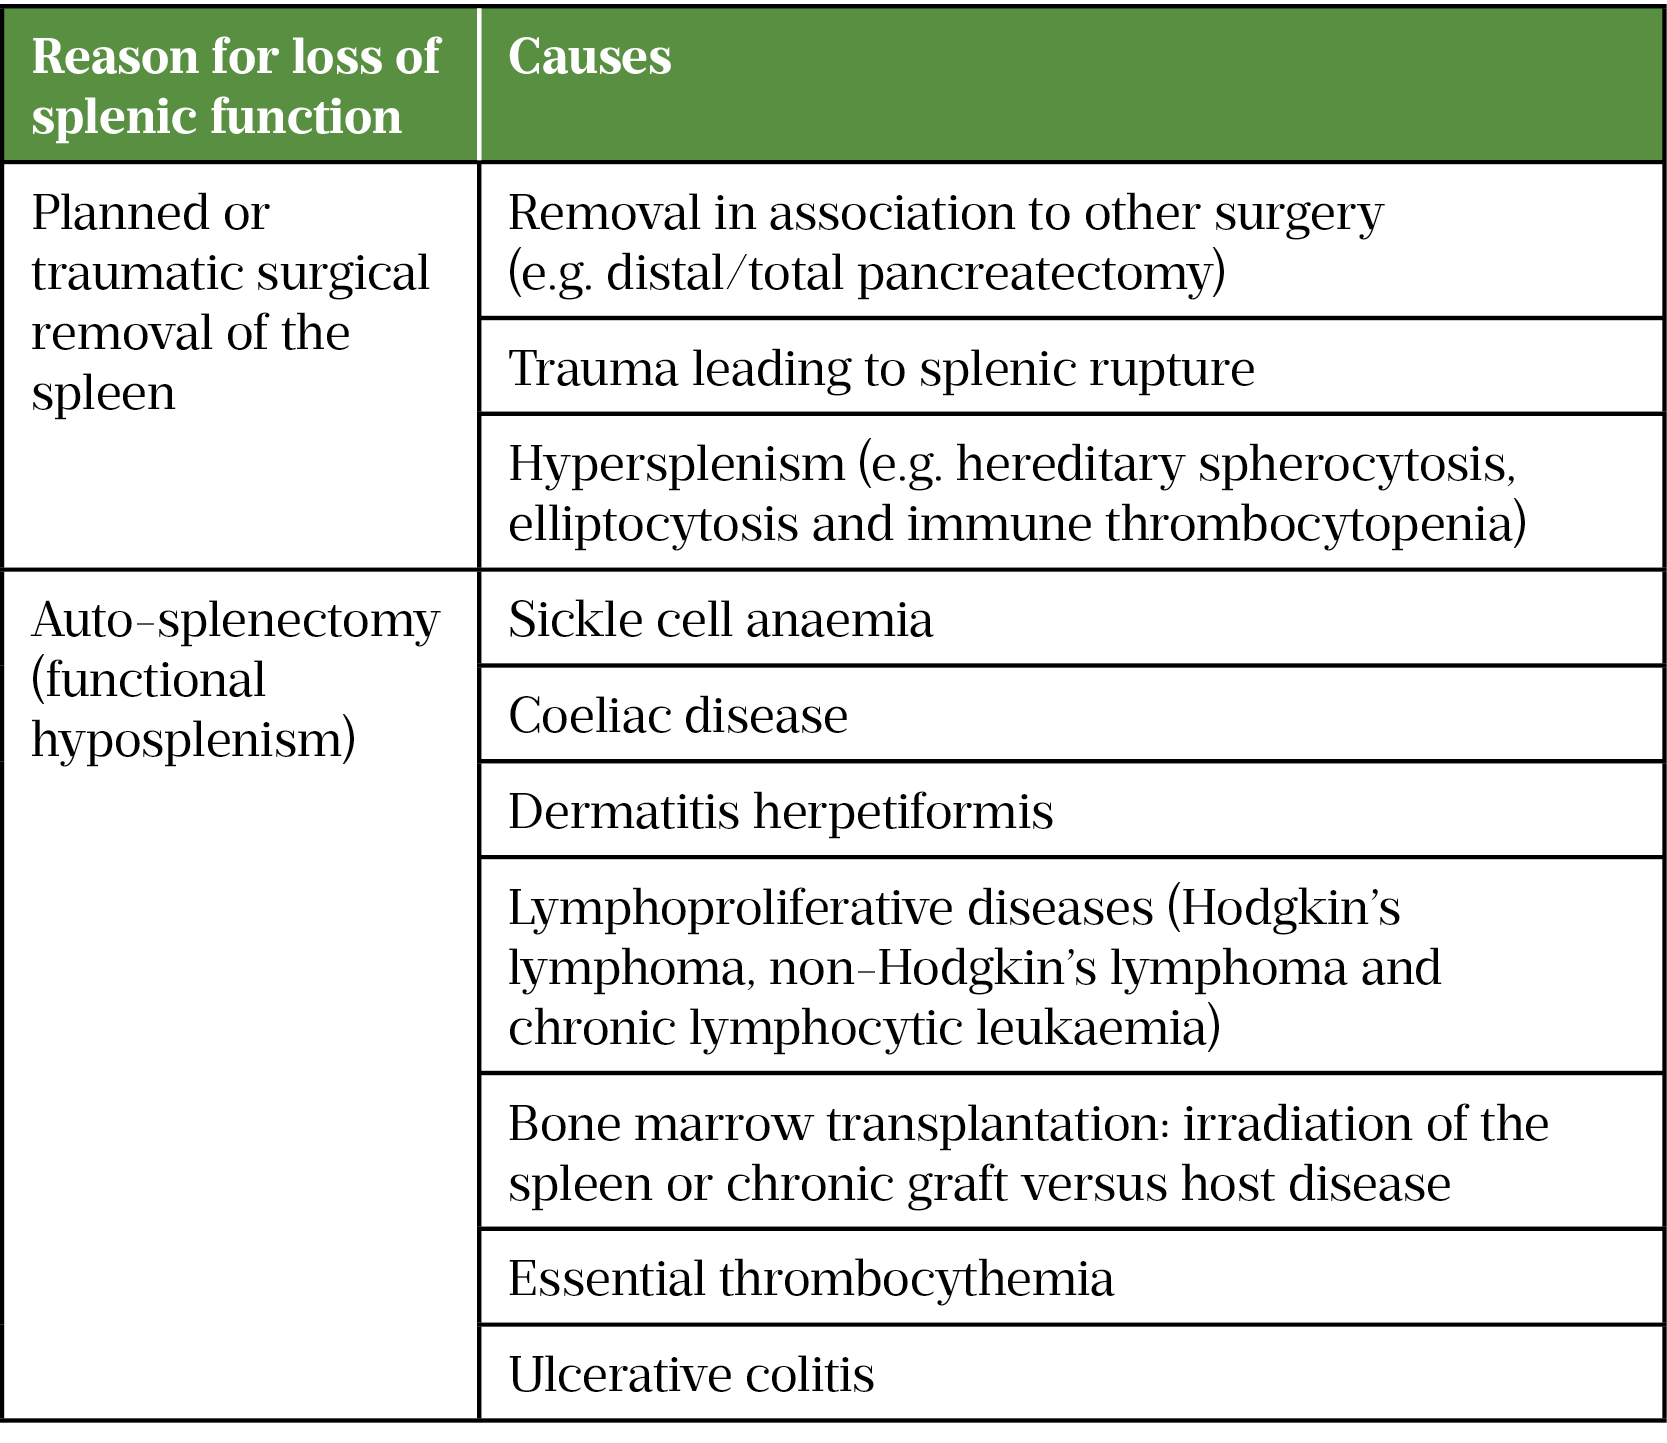 Table 1: Reasons or causes for loss of splenic function* 